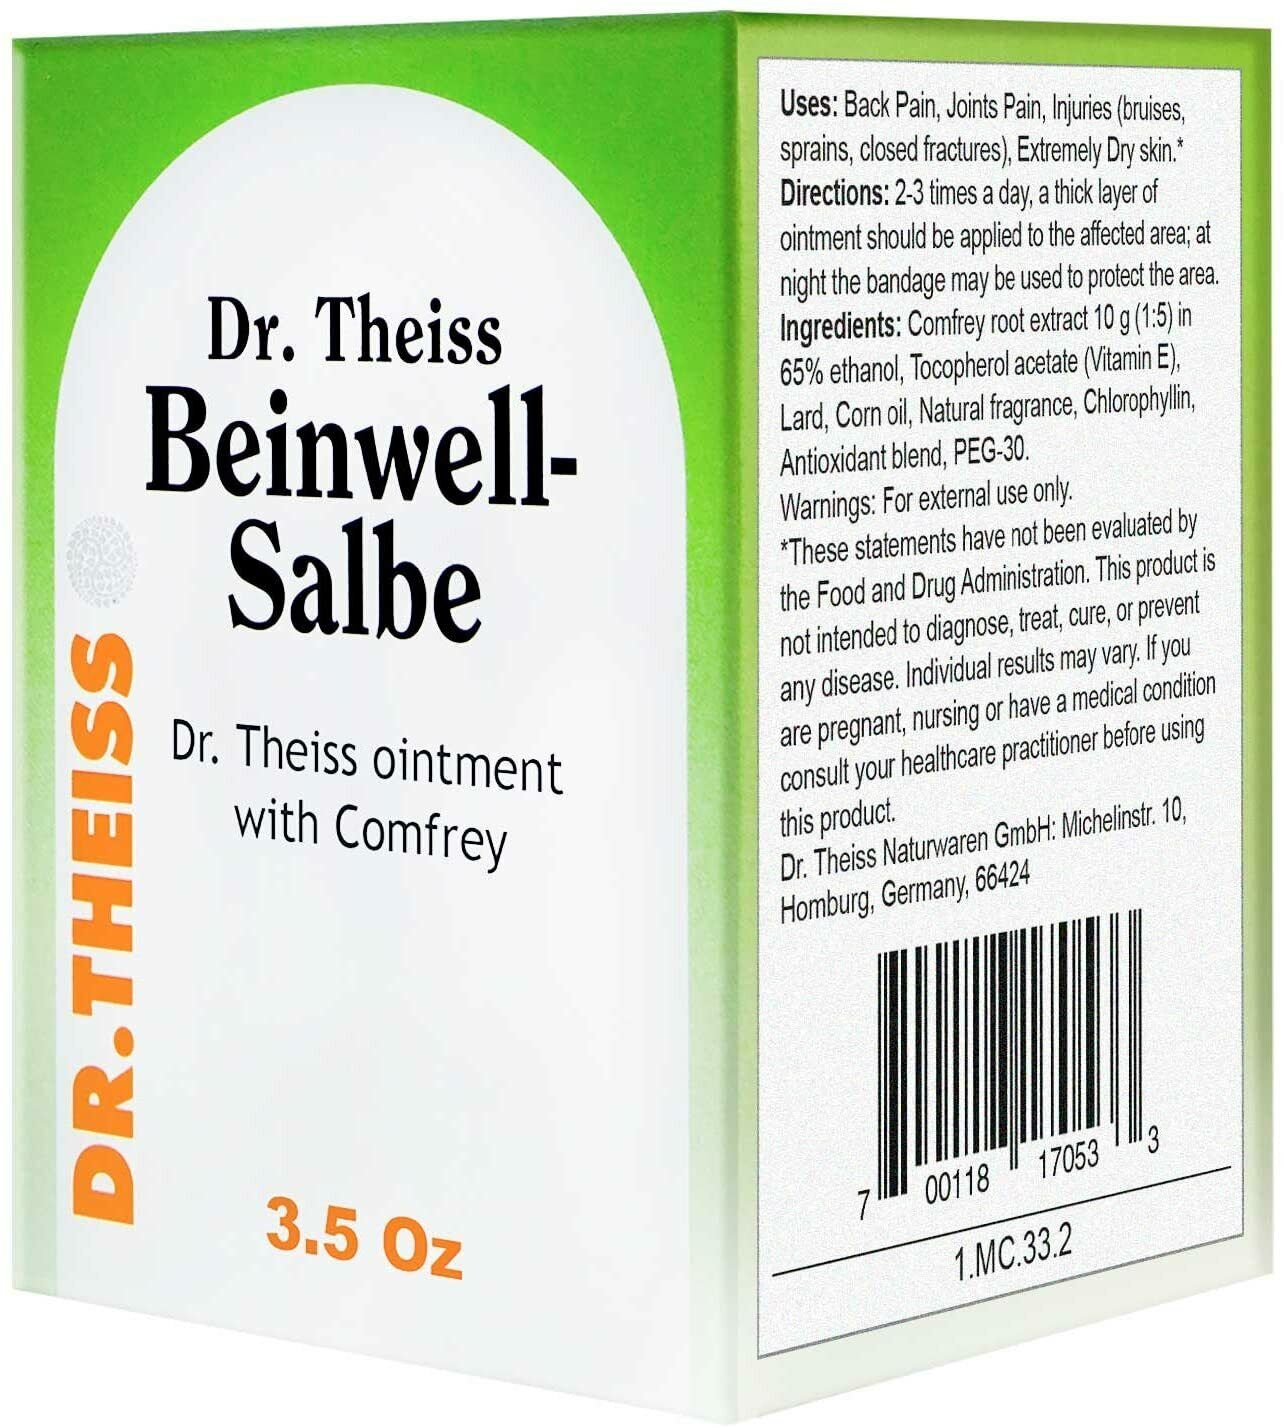 Over-the-counter Ointment Comfrey Beinwell-Salbe with Larkspur by Dr Theiss 100g